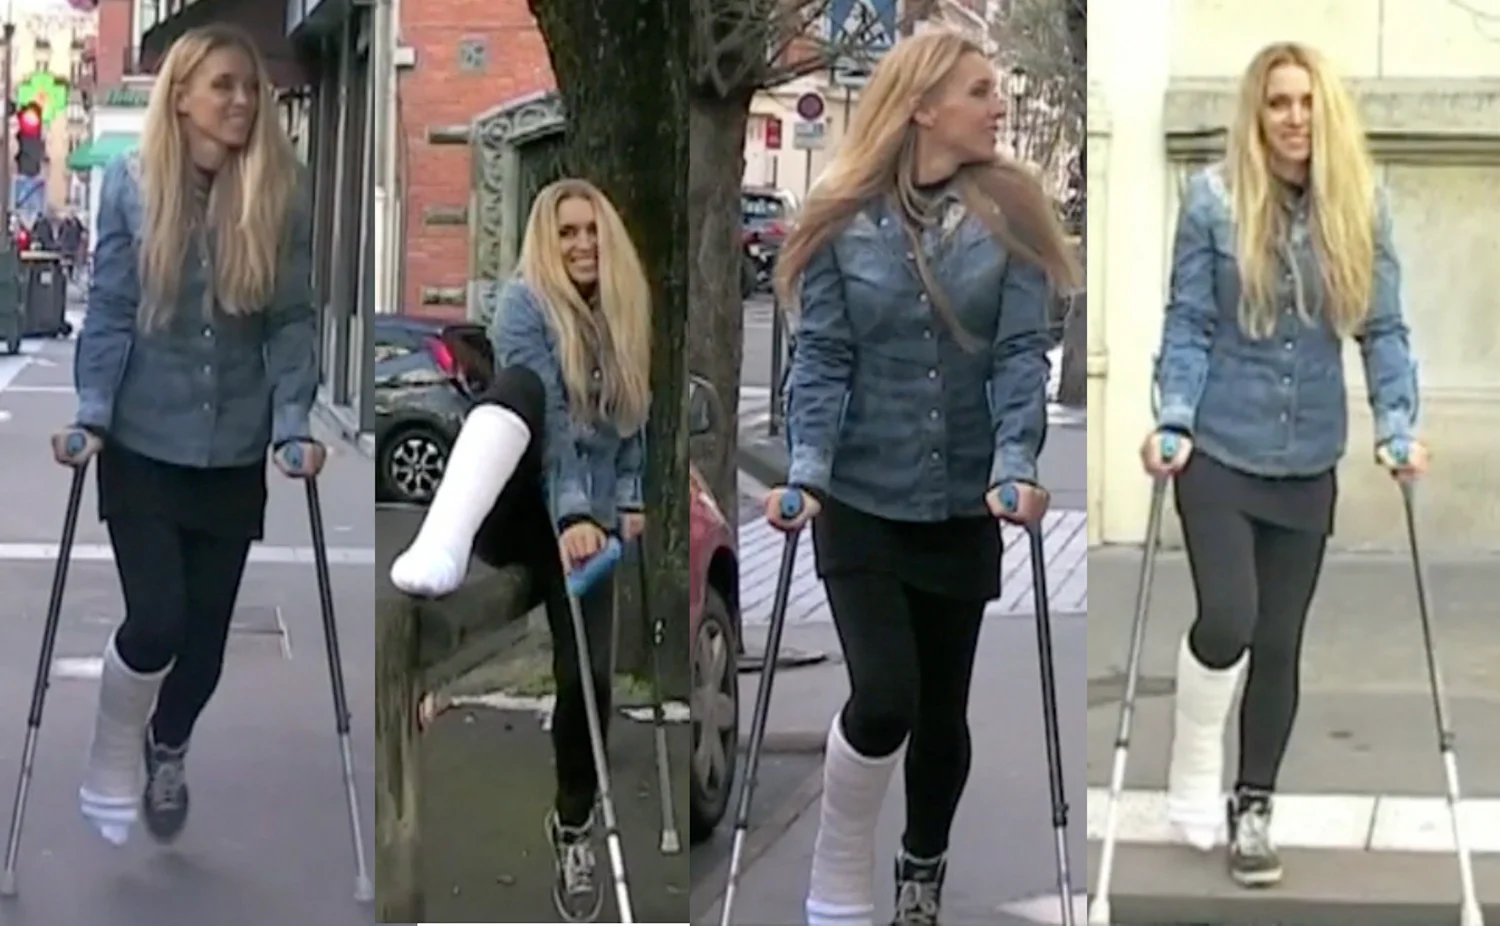 Linda SLC - Linda is gone for a long walk. She can't let her broken foot touches the ground, so she has to use crutches all the way. If you enjoy pretty blond girl struggling with crutches, this video is for you.